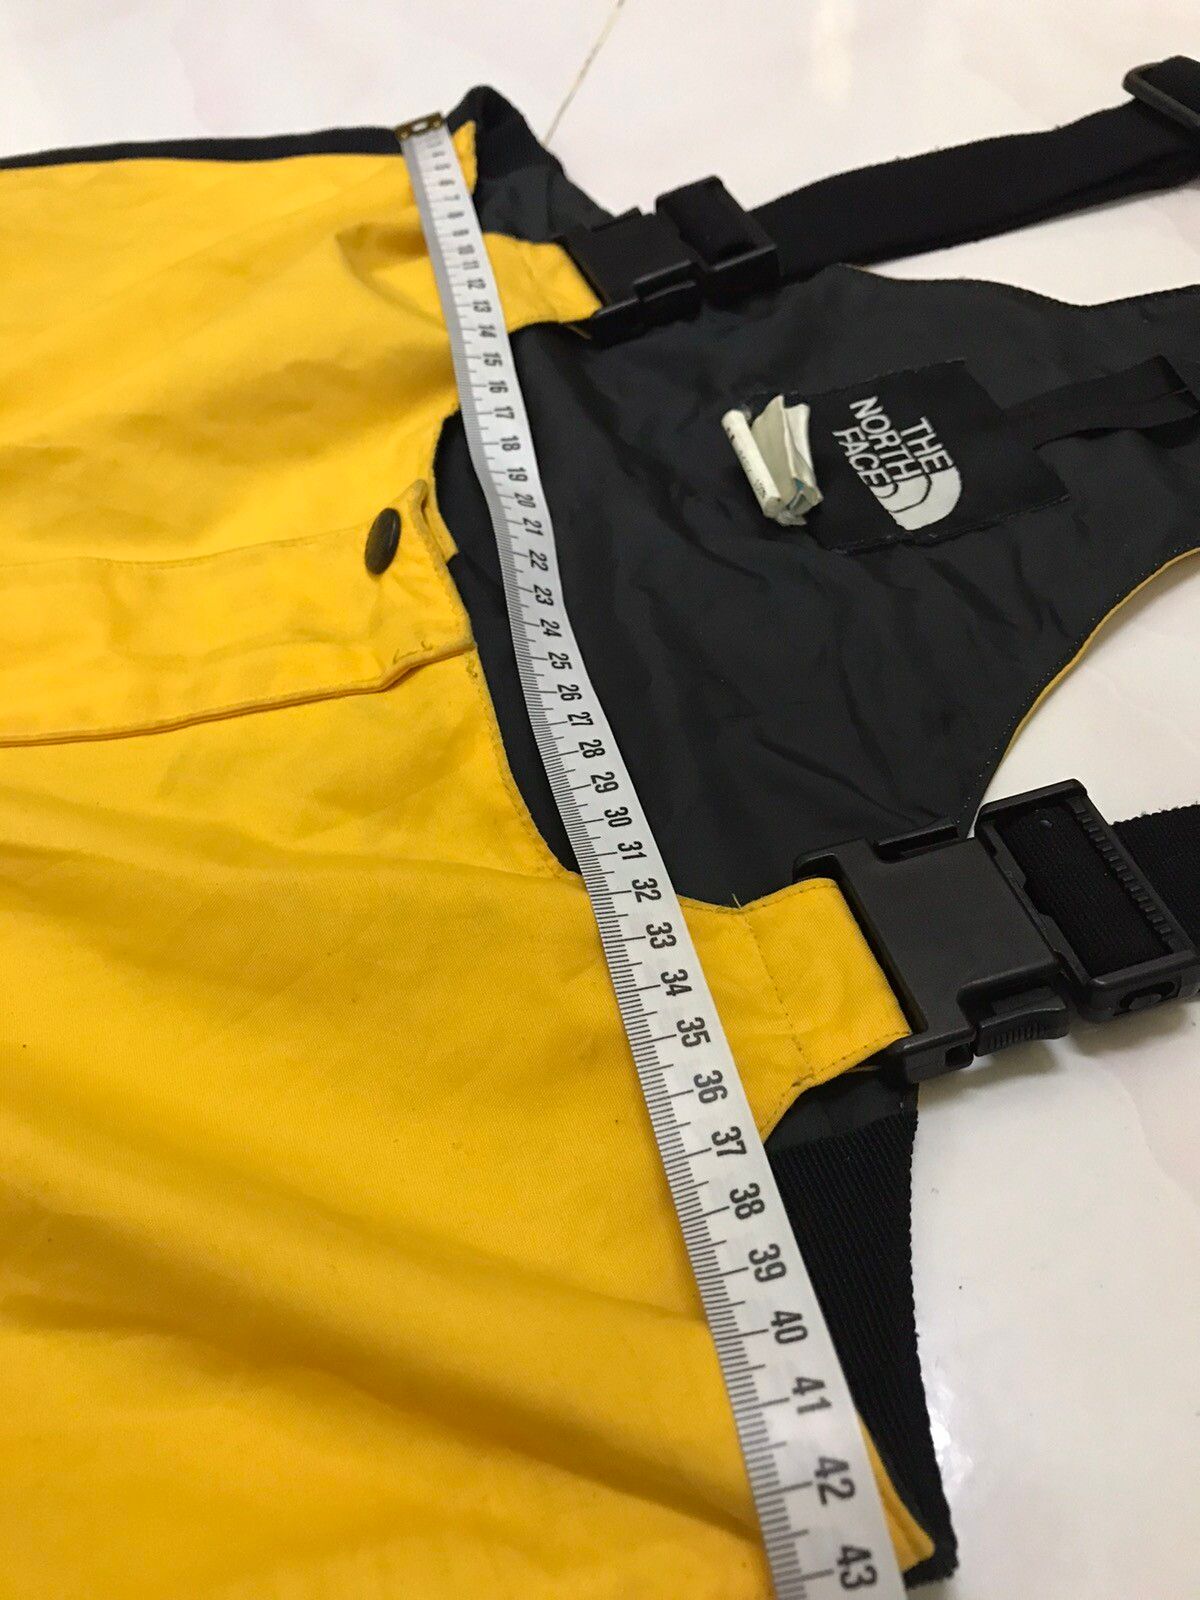 THE NORTH FACE” GORE-TEX SKI PANTS BIBS OVERALLS IN YELLOW - 9